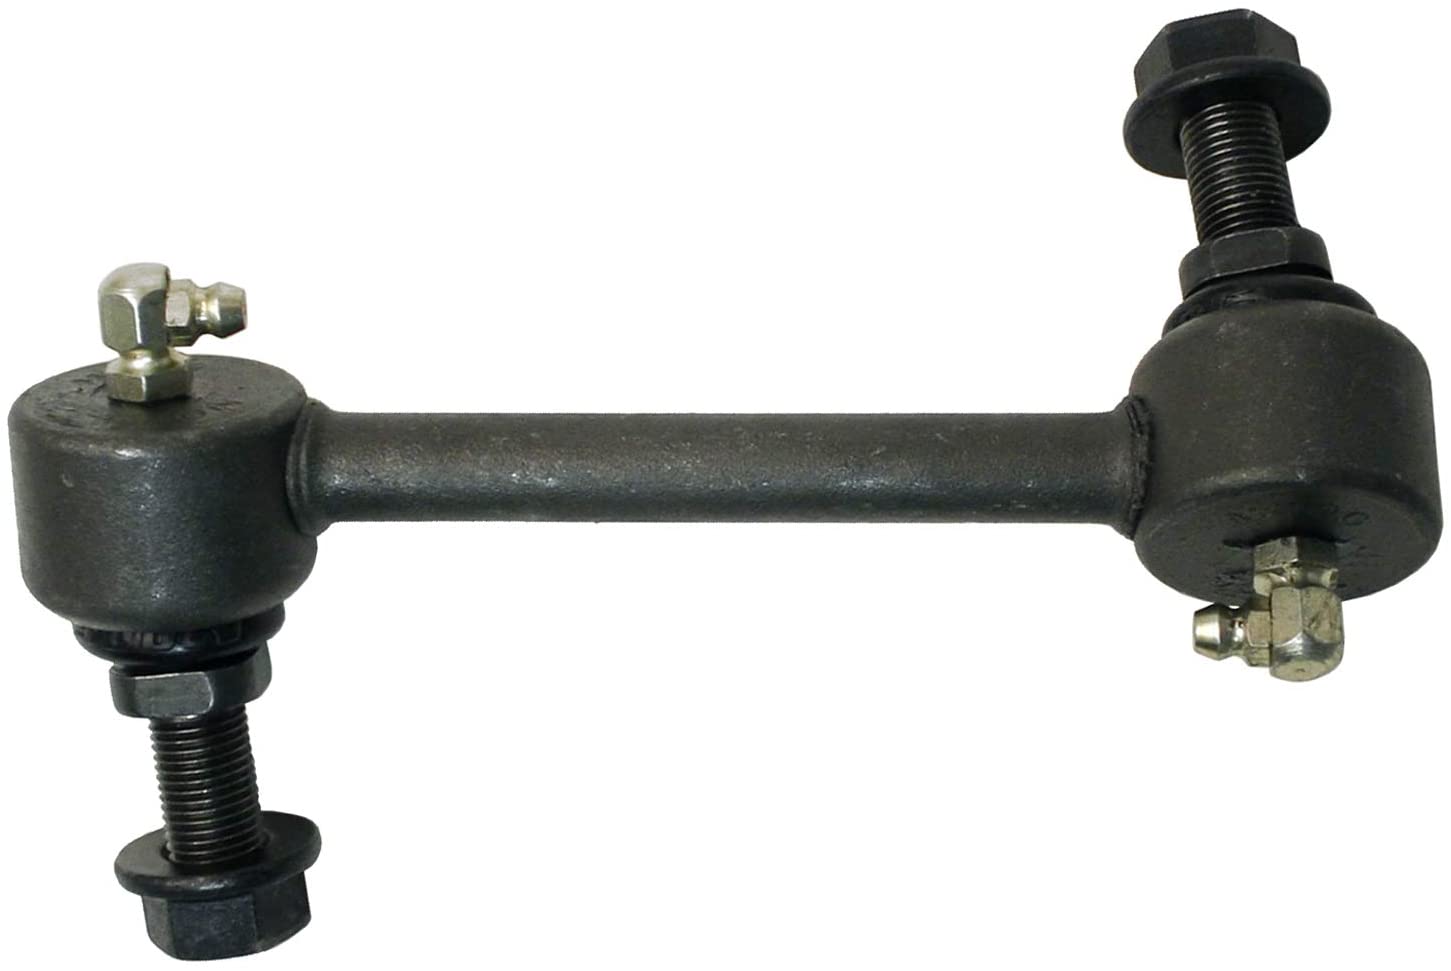 MOOG Chassis Products K6668 Stabilizer Bar Link Kit